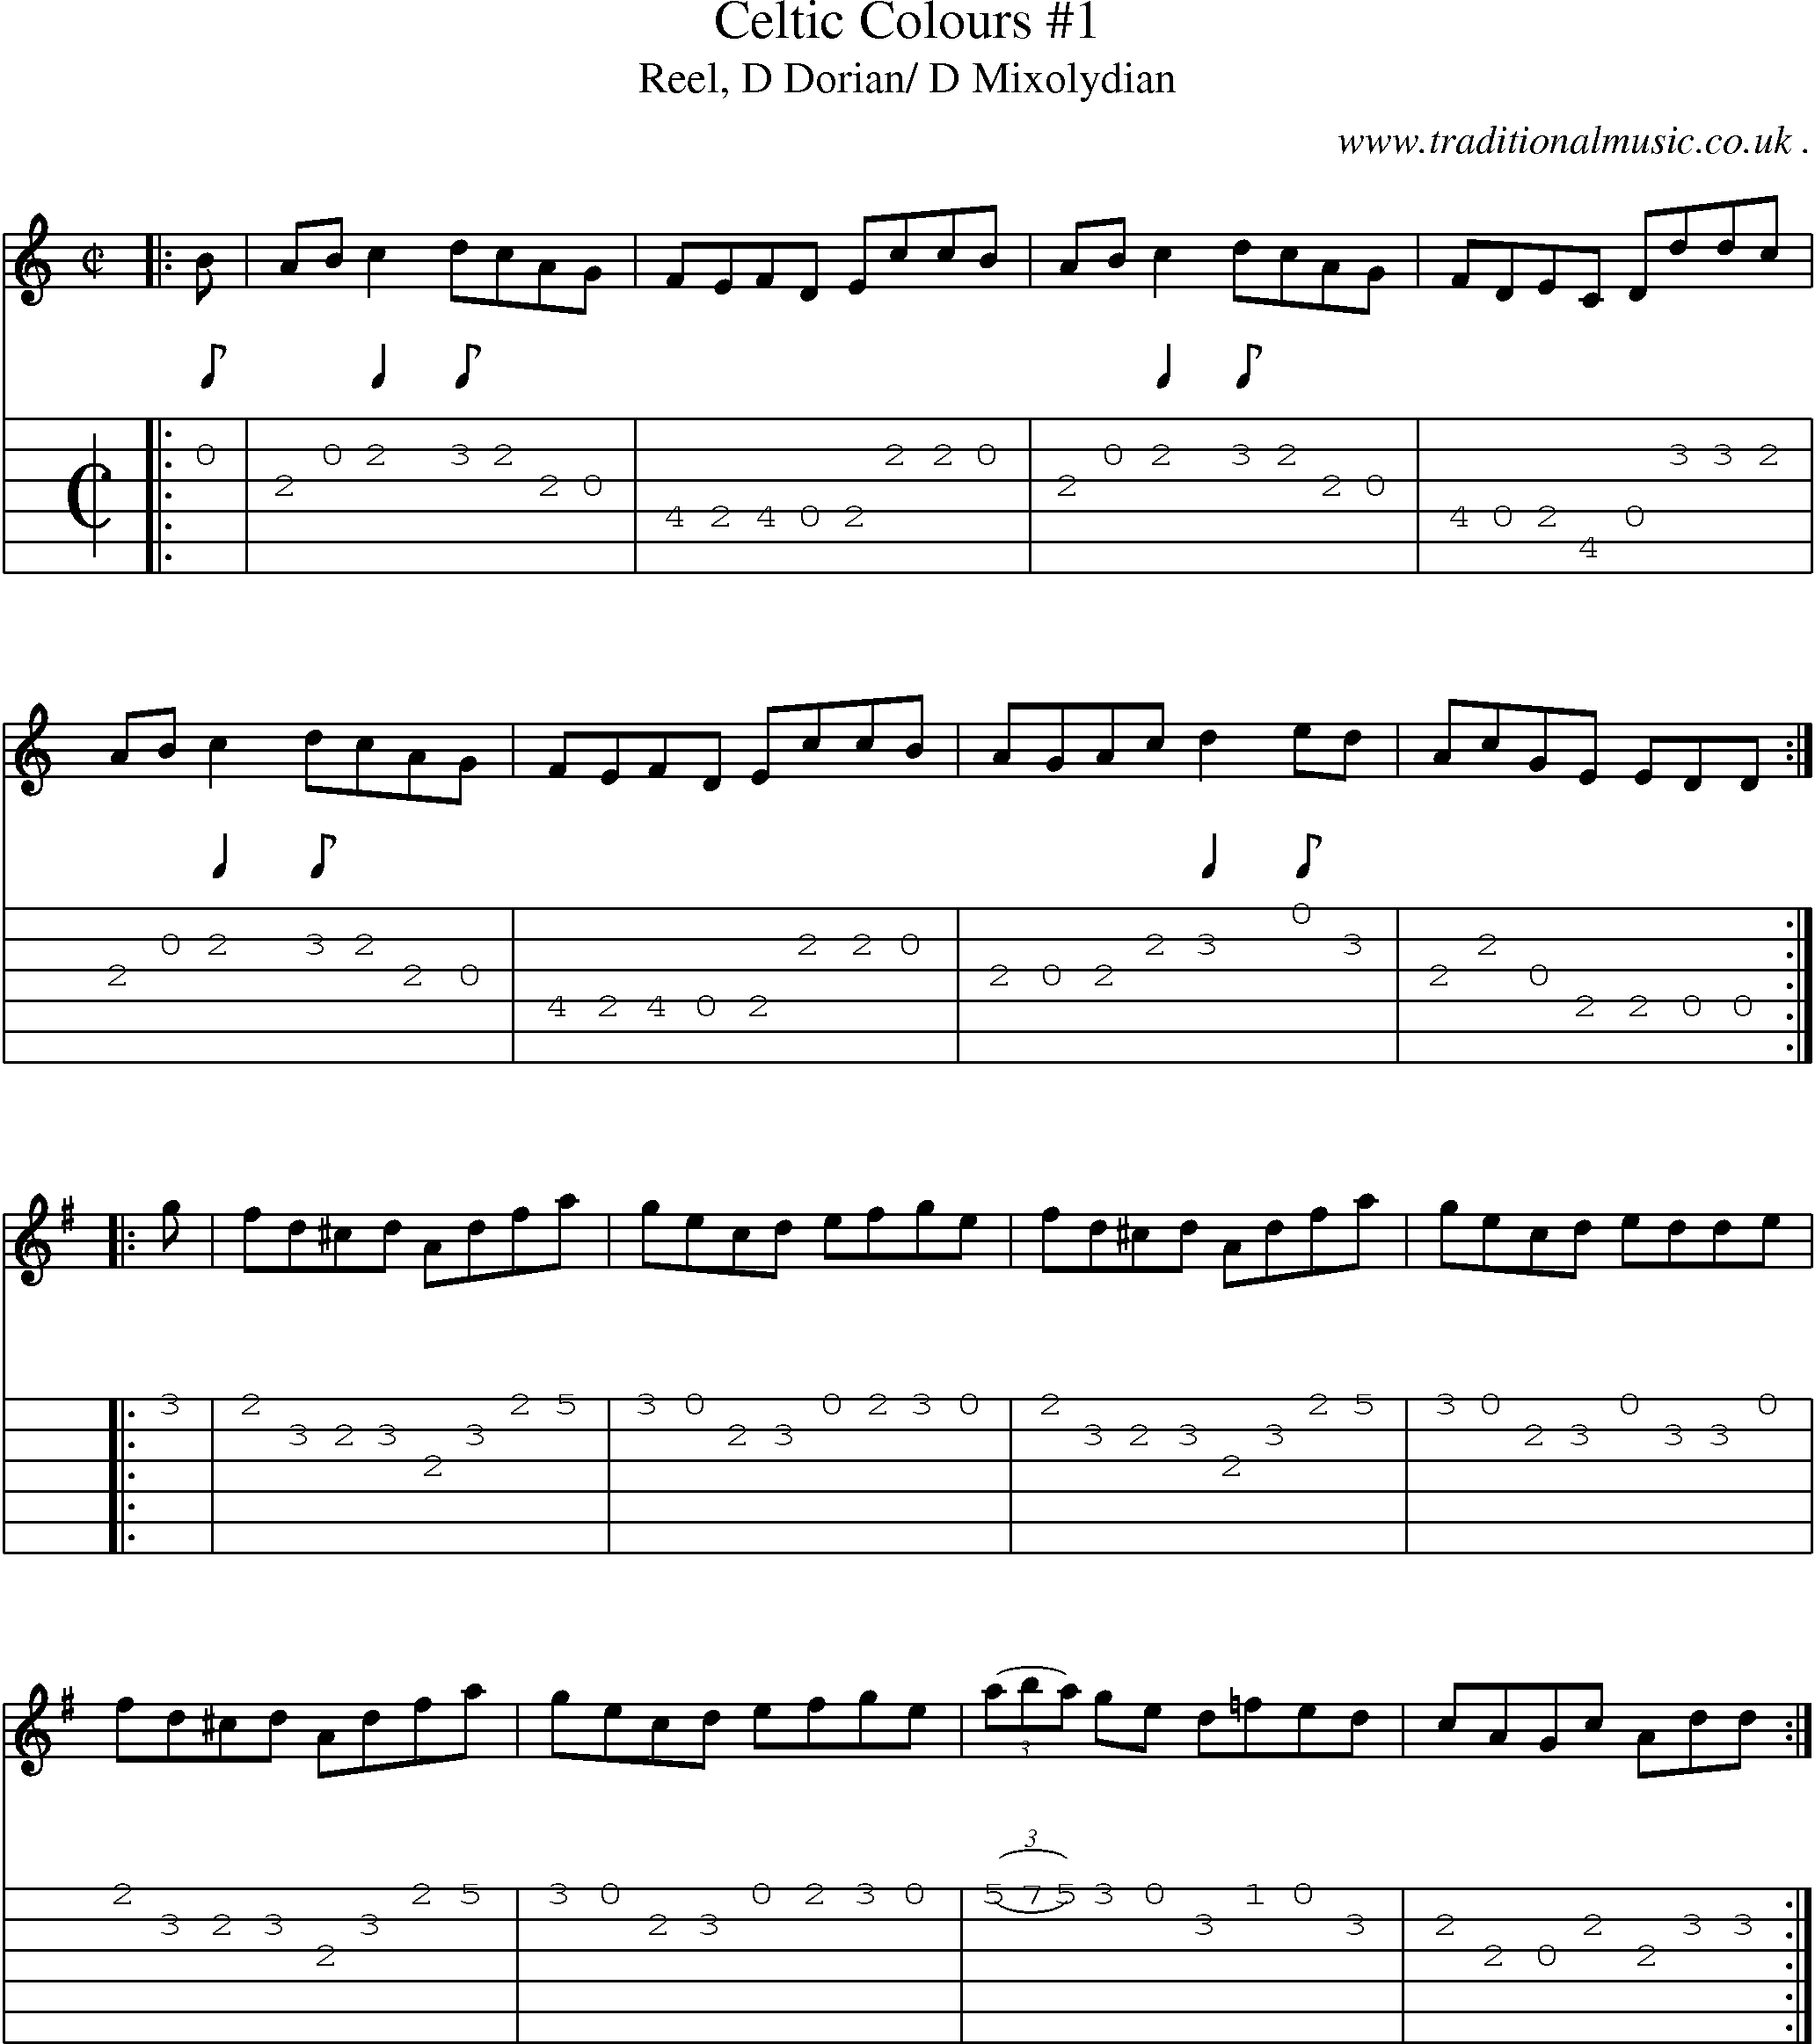 Sheet-music  score, Chords and Guitar Tabs for Celtic Colours 1